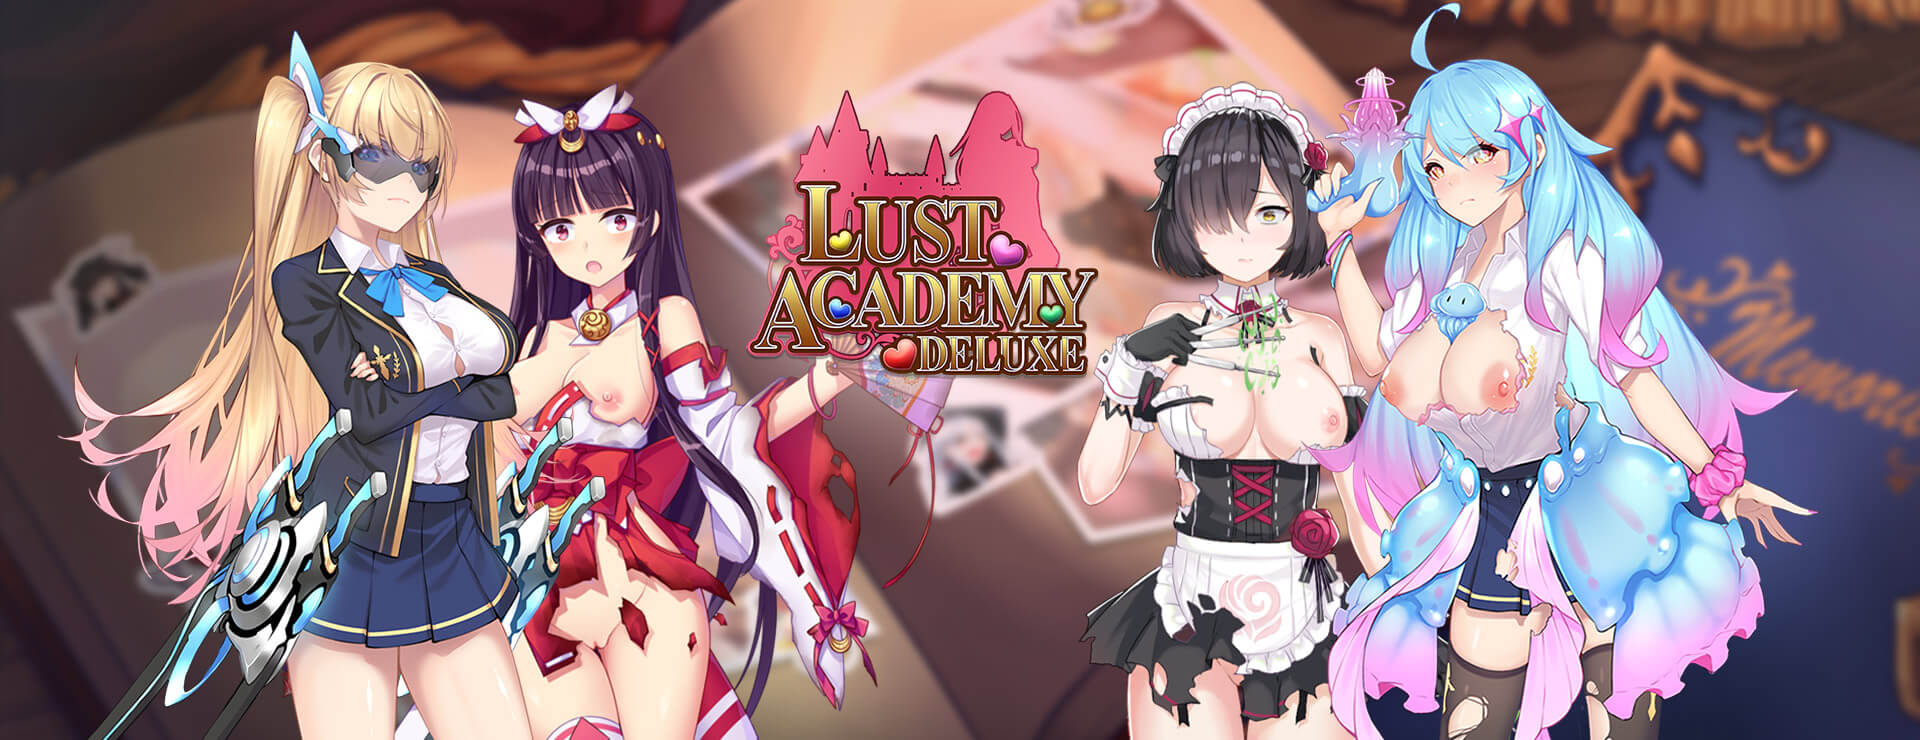 Lust Academy Deluxe - Action Adventure Game